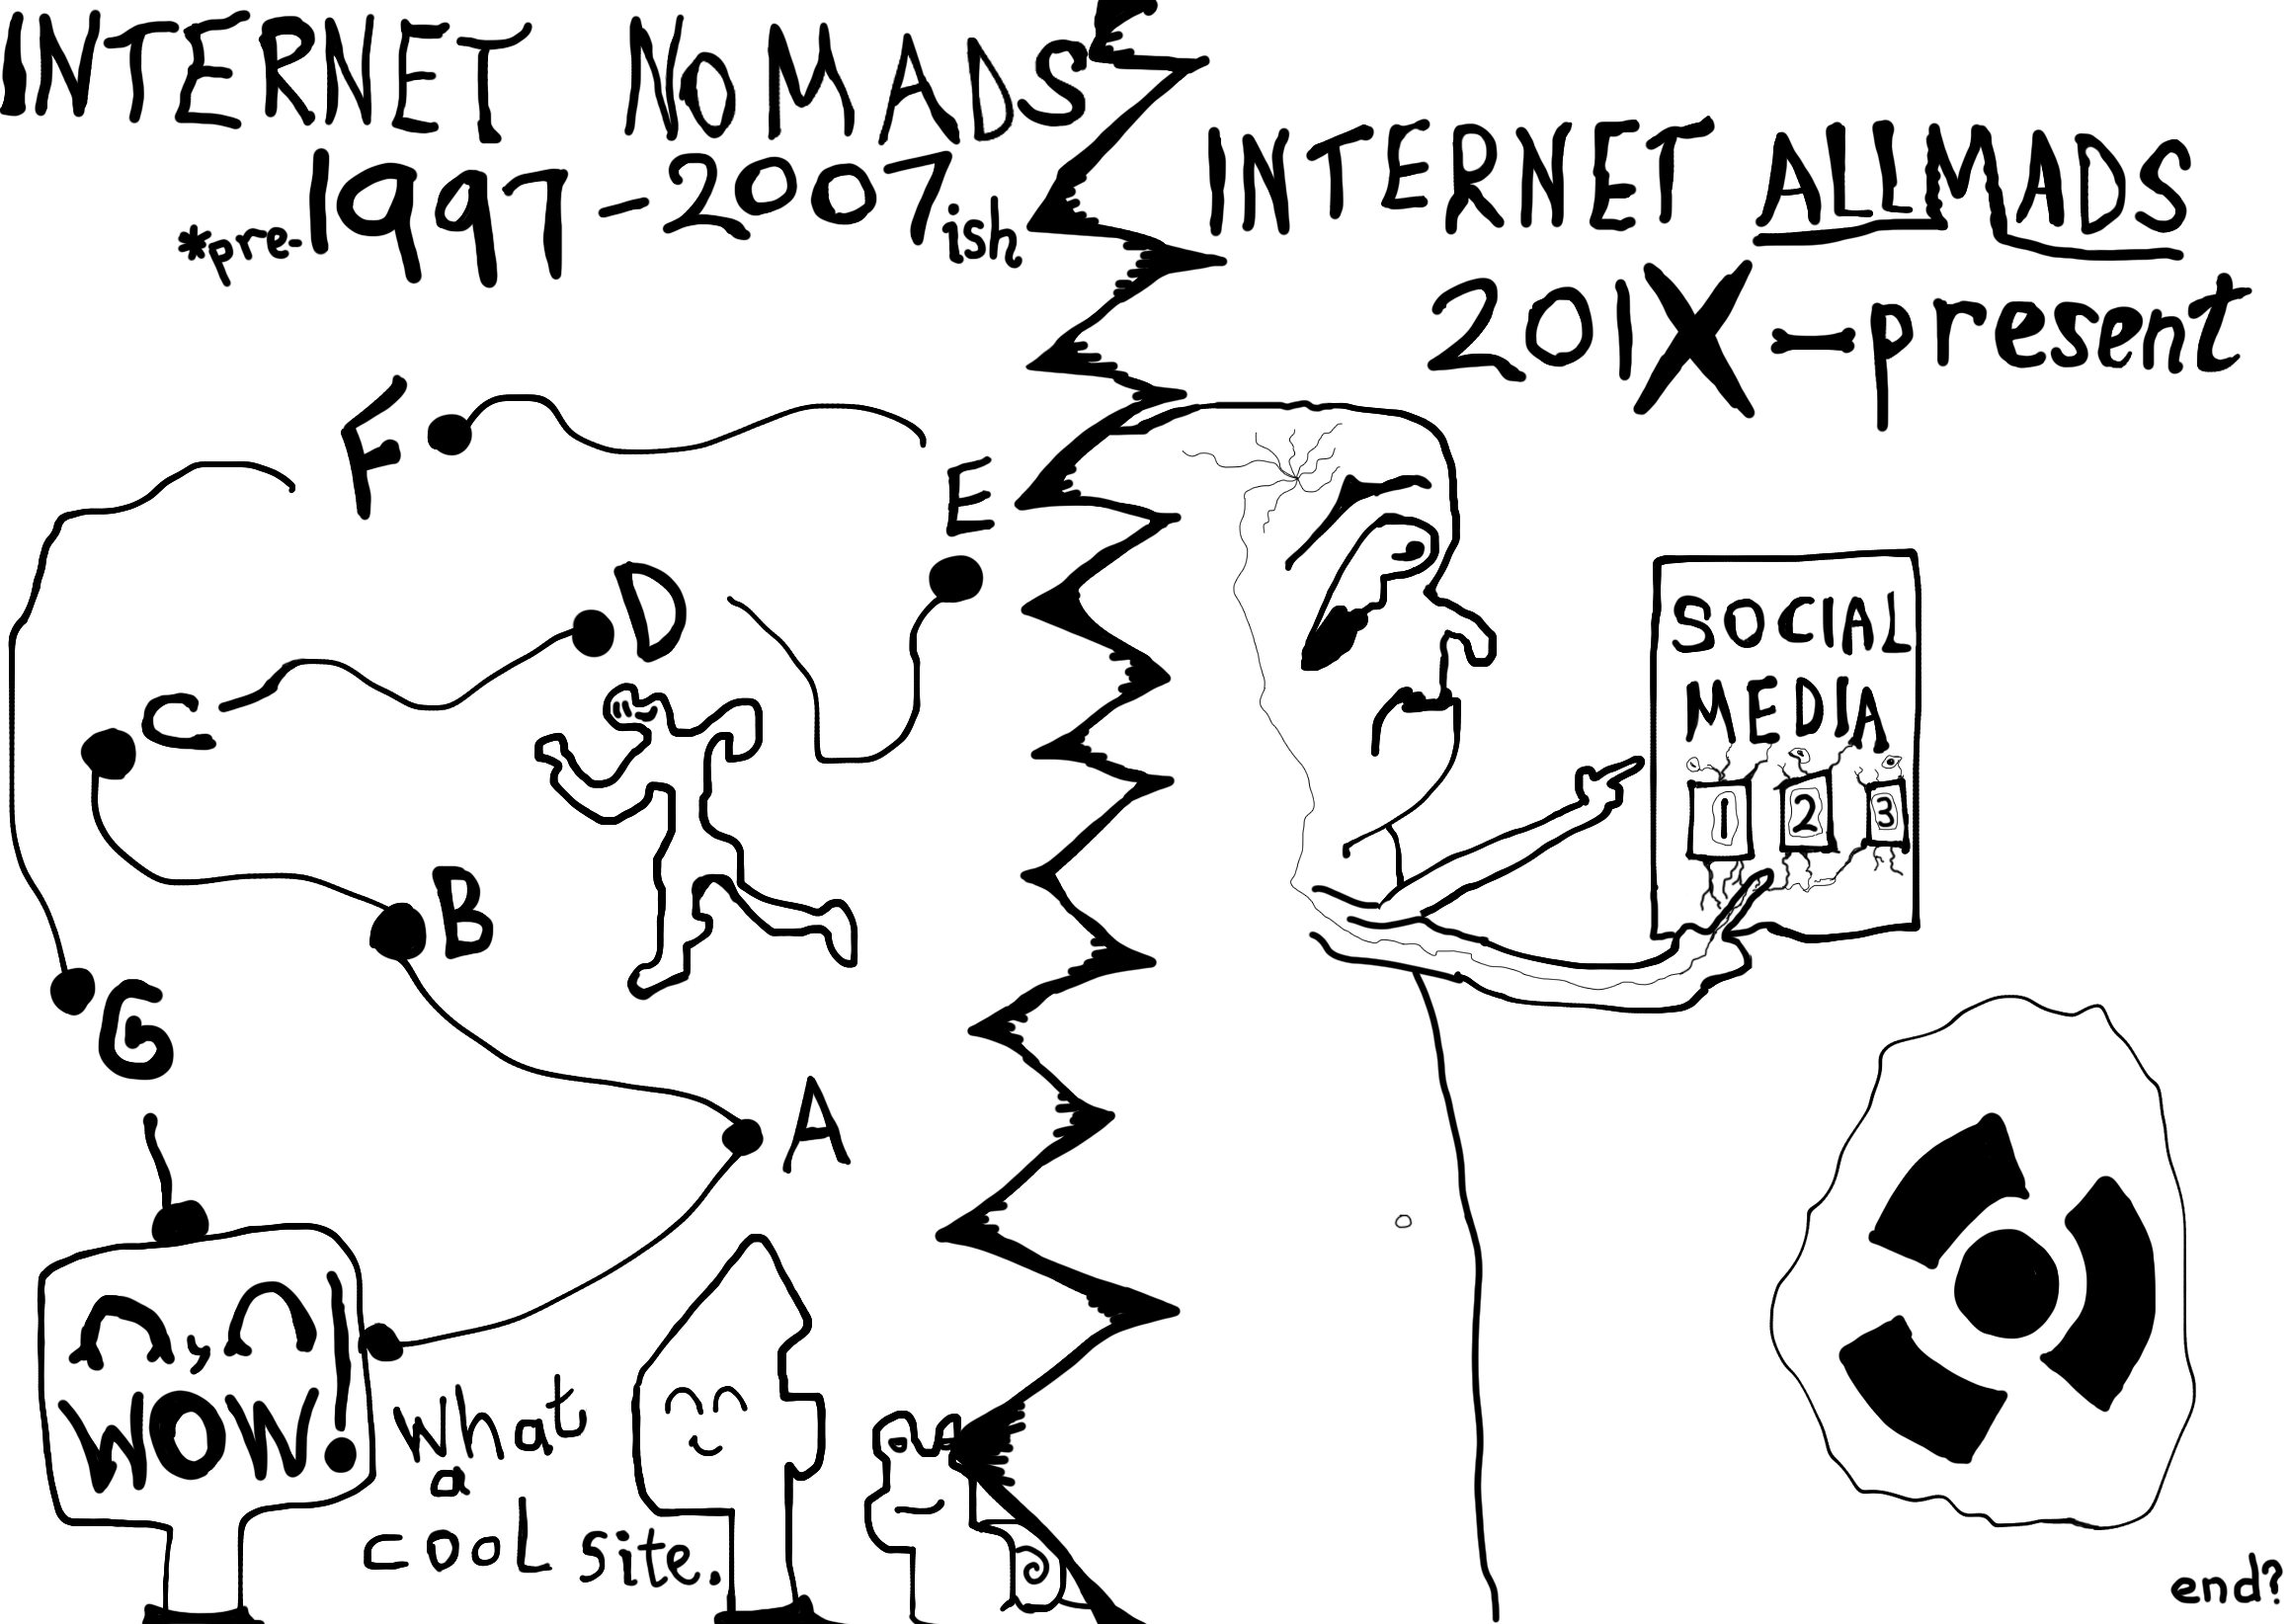 Mx Manners 47 - Internet Nomads